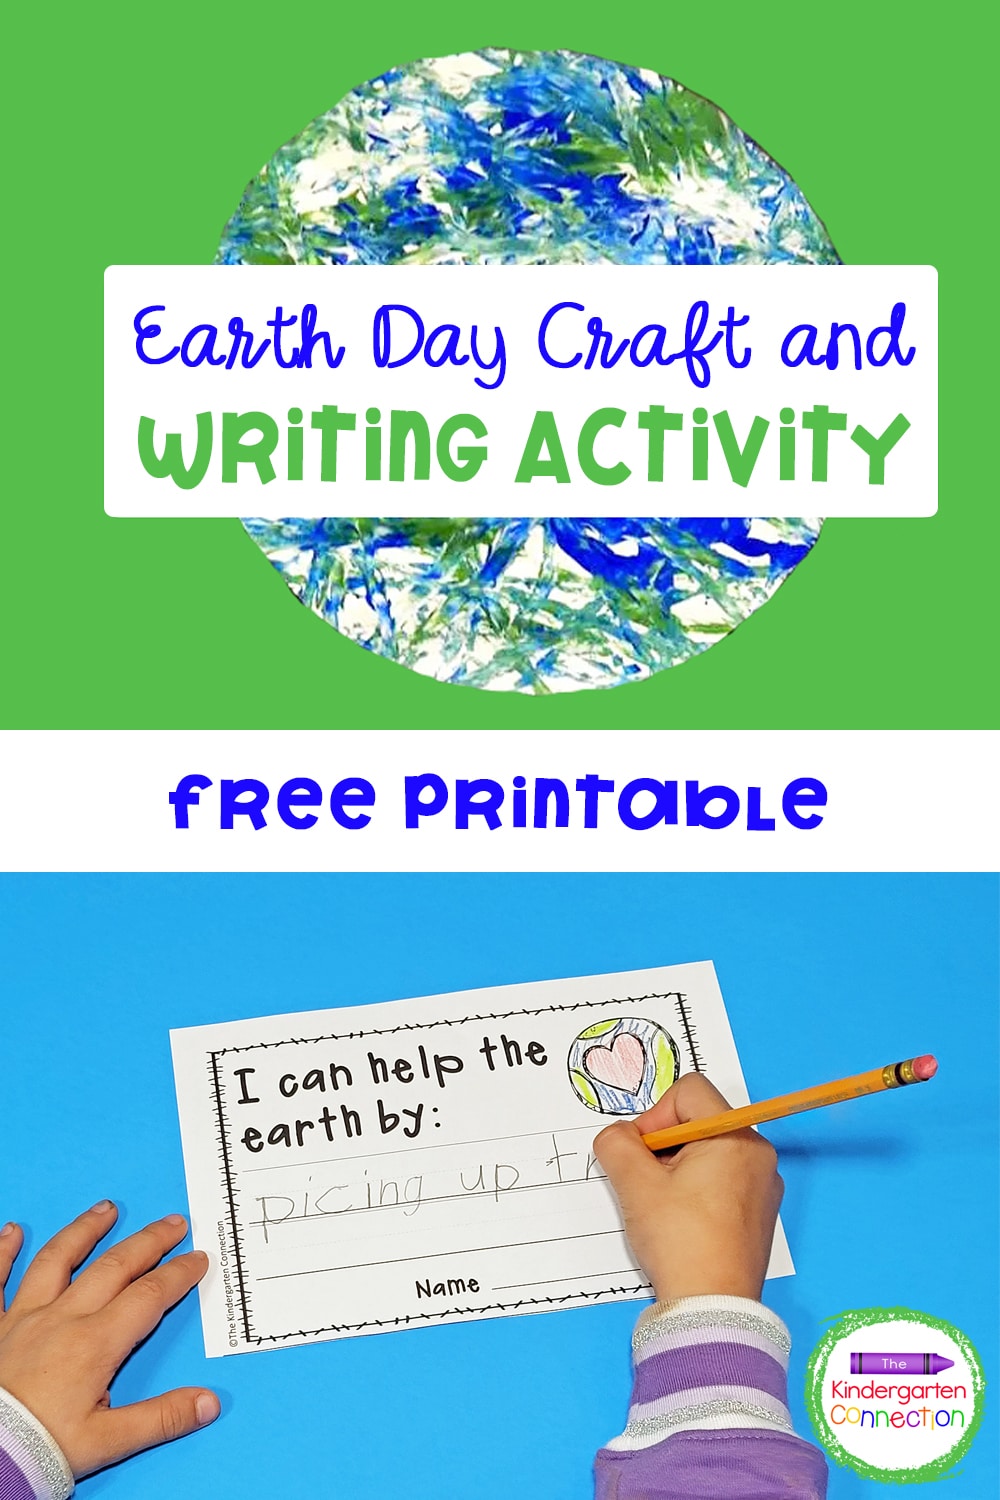 Grab our free Earth Day Craft and Writing Activity to use with your students this spring and celebrate all the ways we can help the earth!